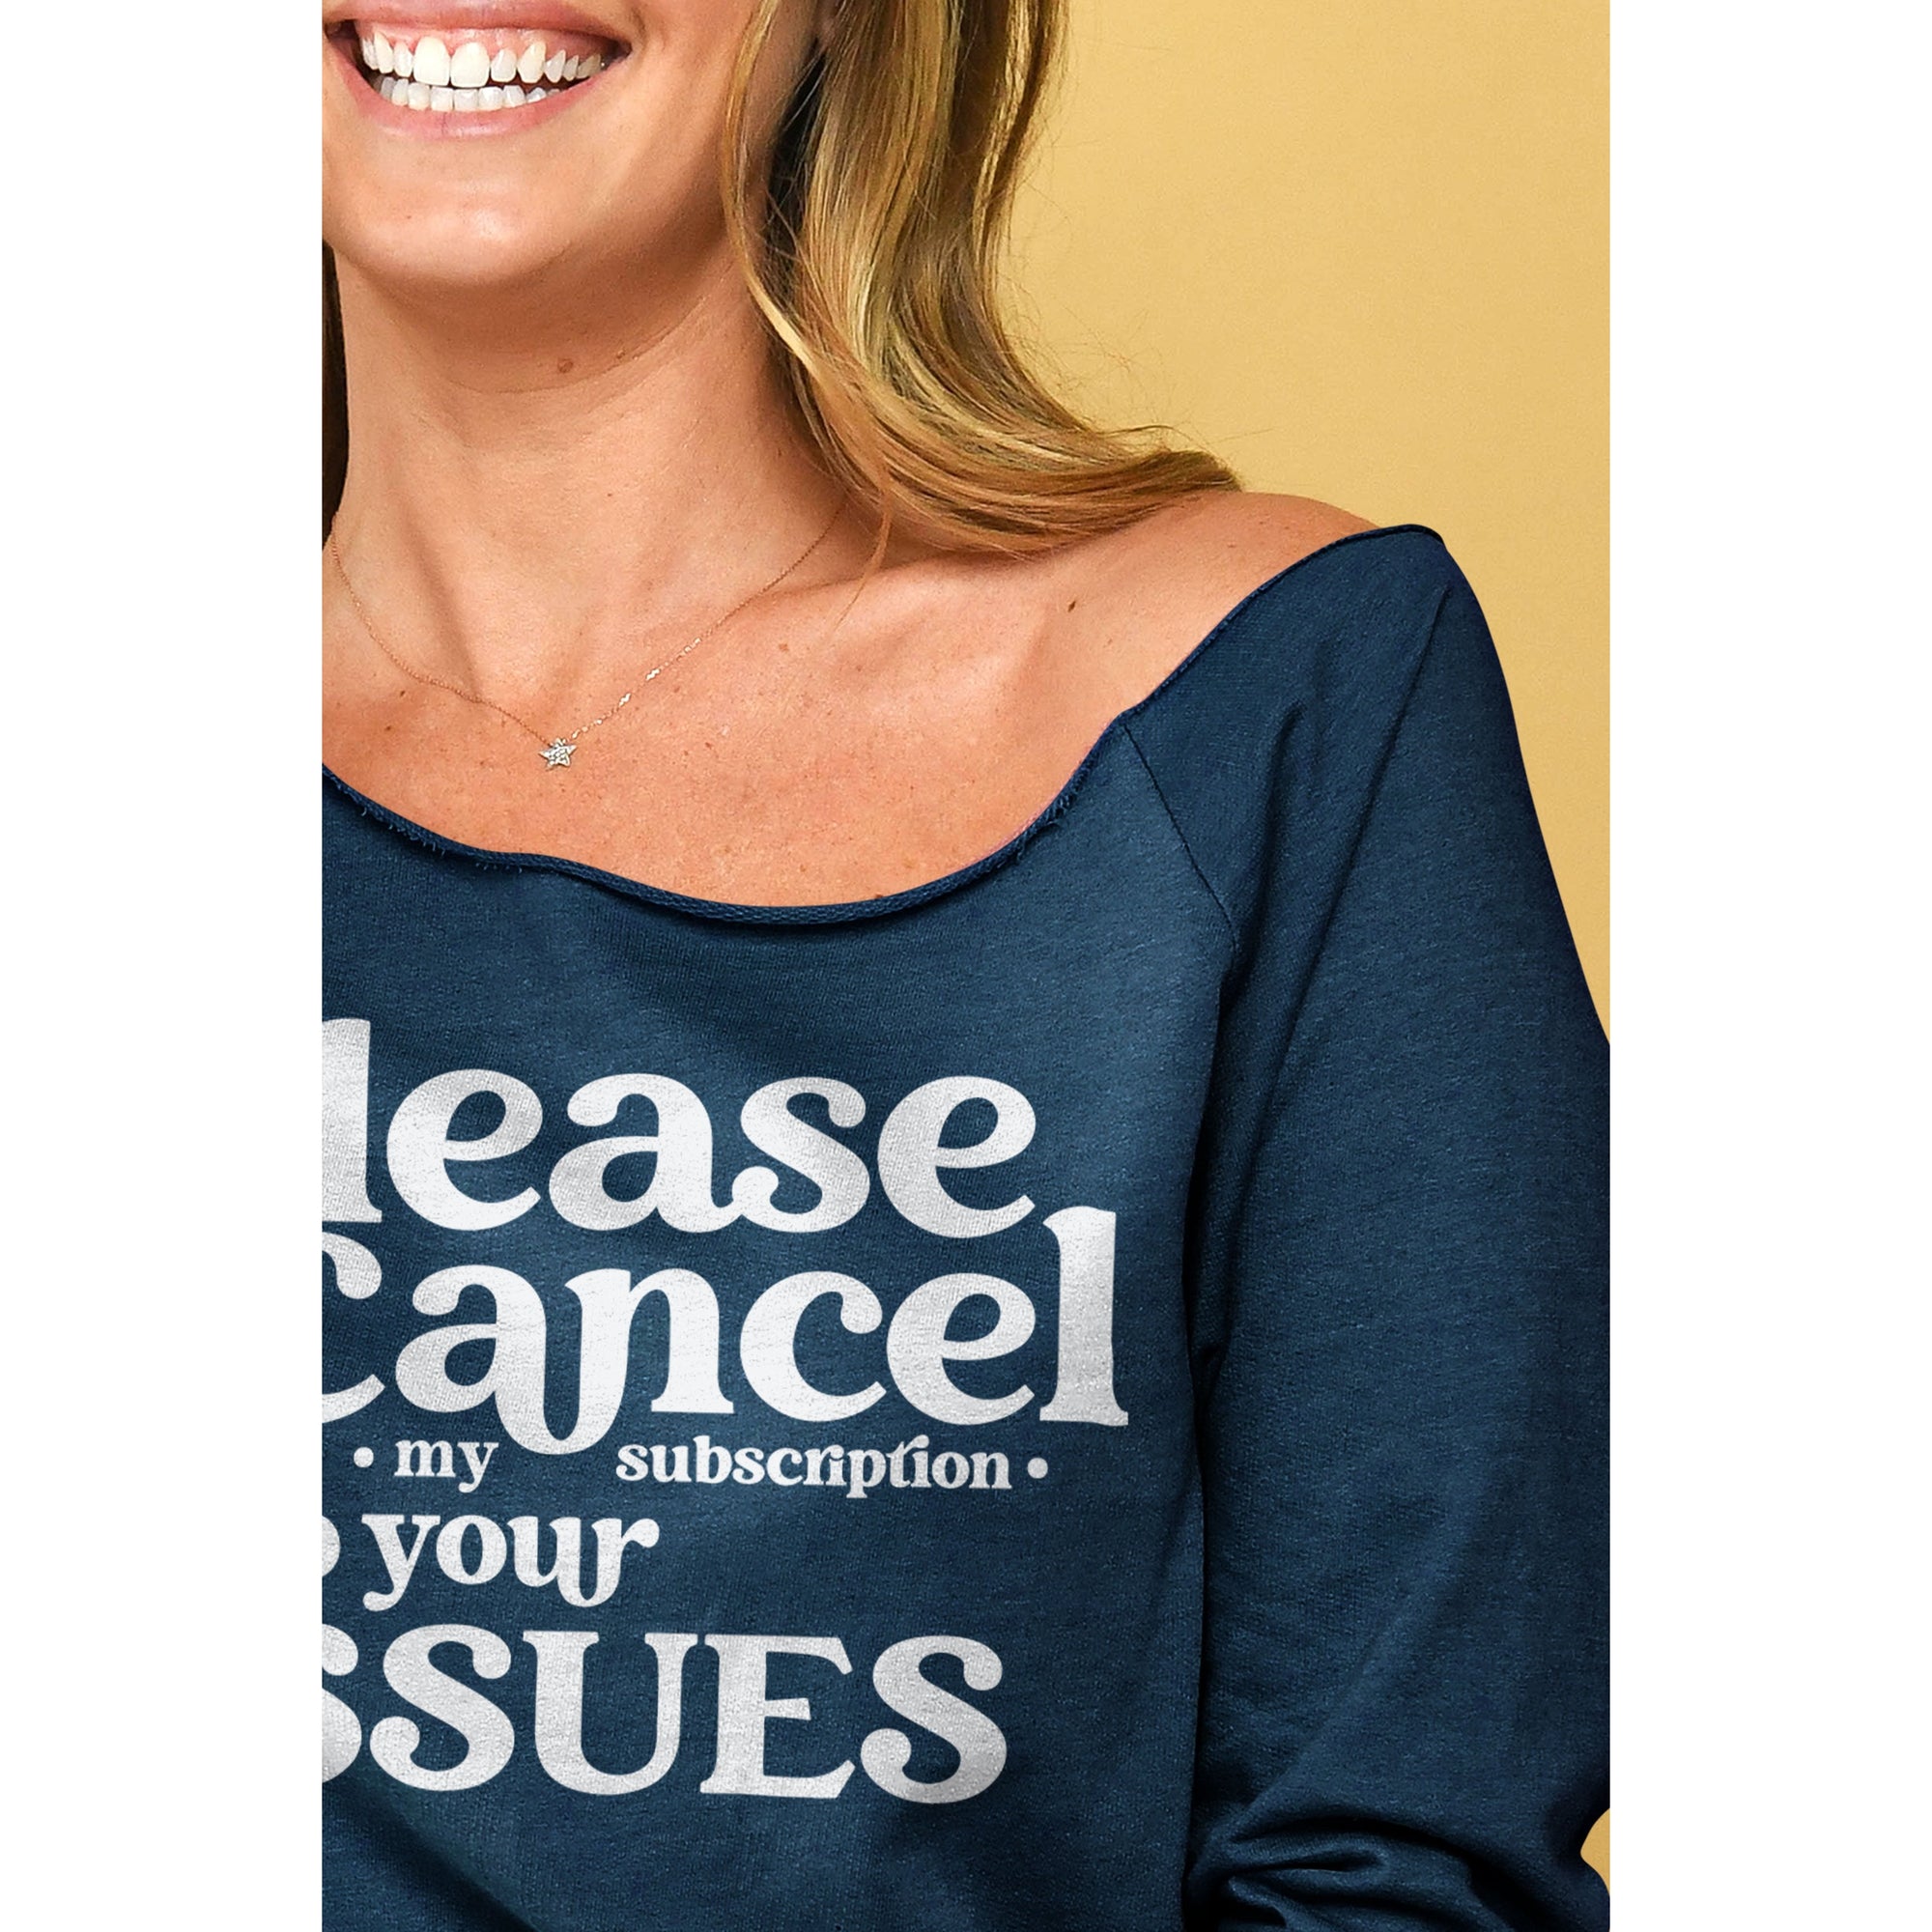 Please Cancel My Subscription To Your Issues - threadtank | stories you can wear